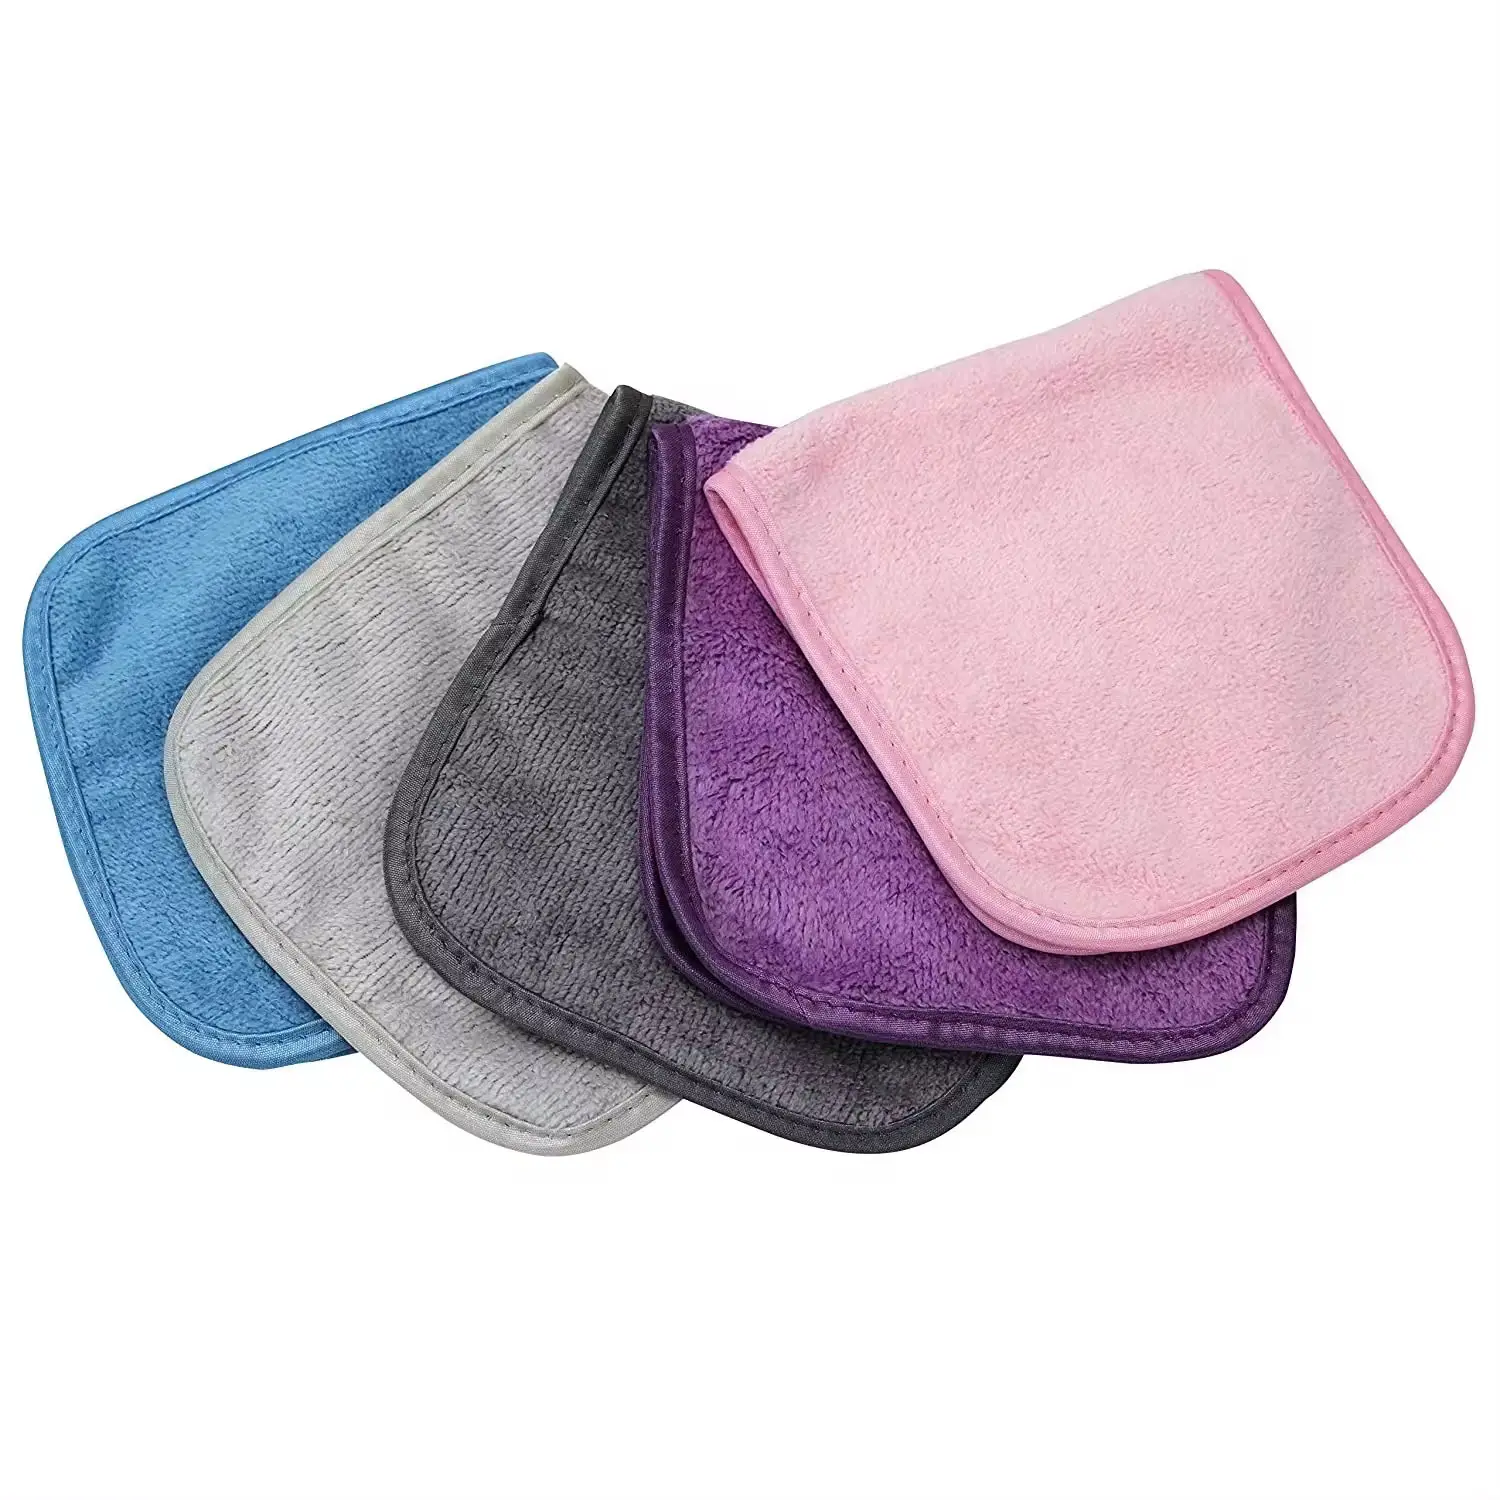 Reusable Makeup Cloth Clean Towel Facial Cleaning Towel Chemical Free Remove Makeup Instantly with Just Water